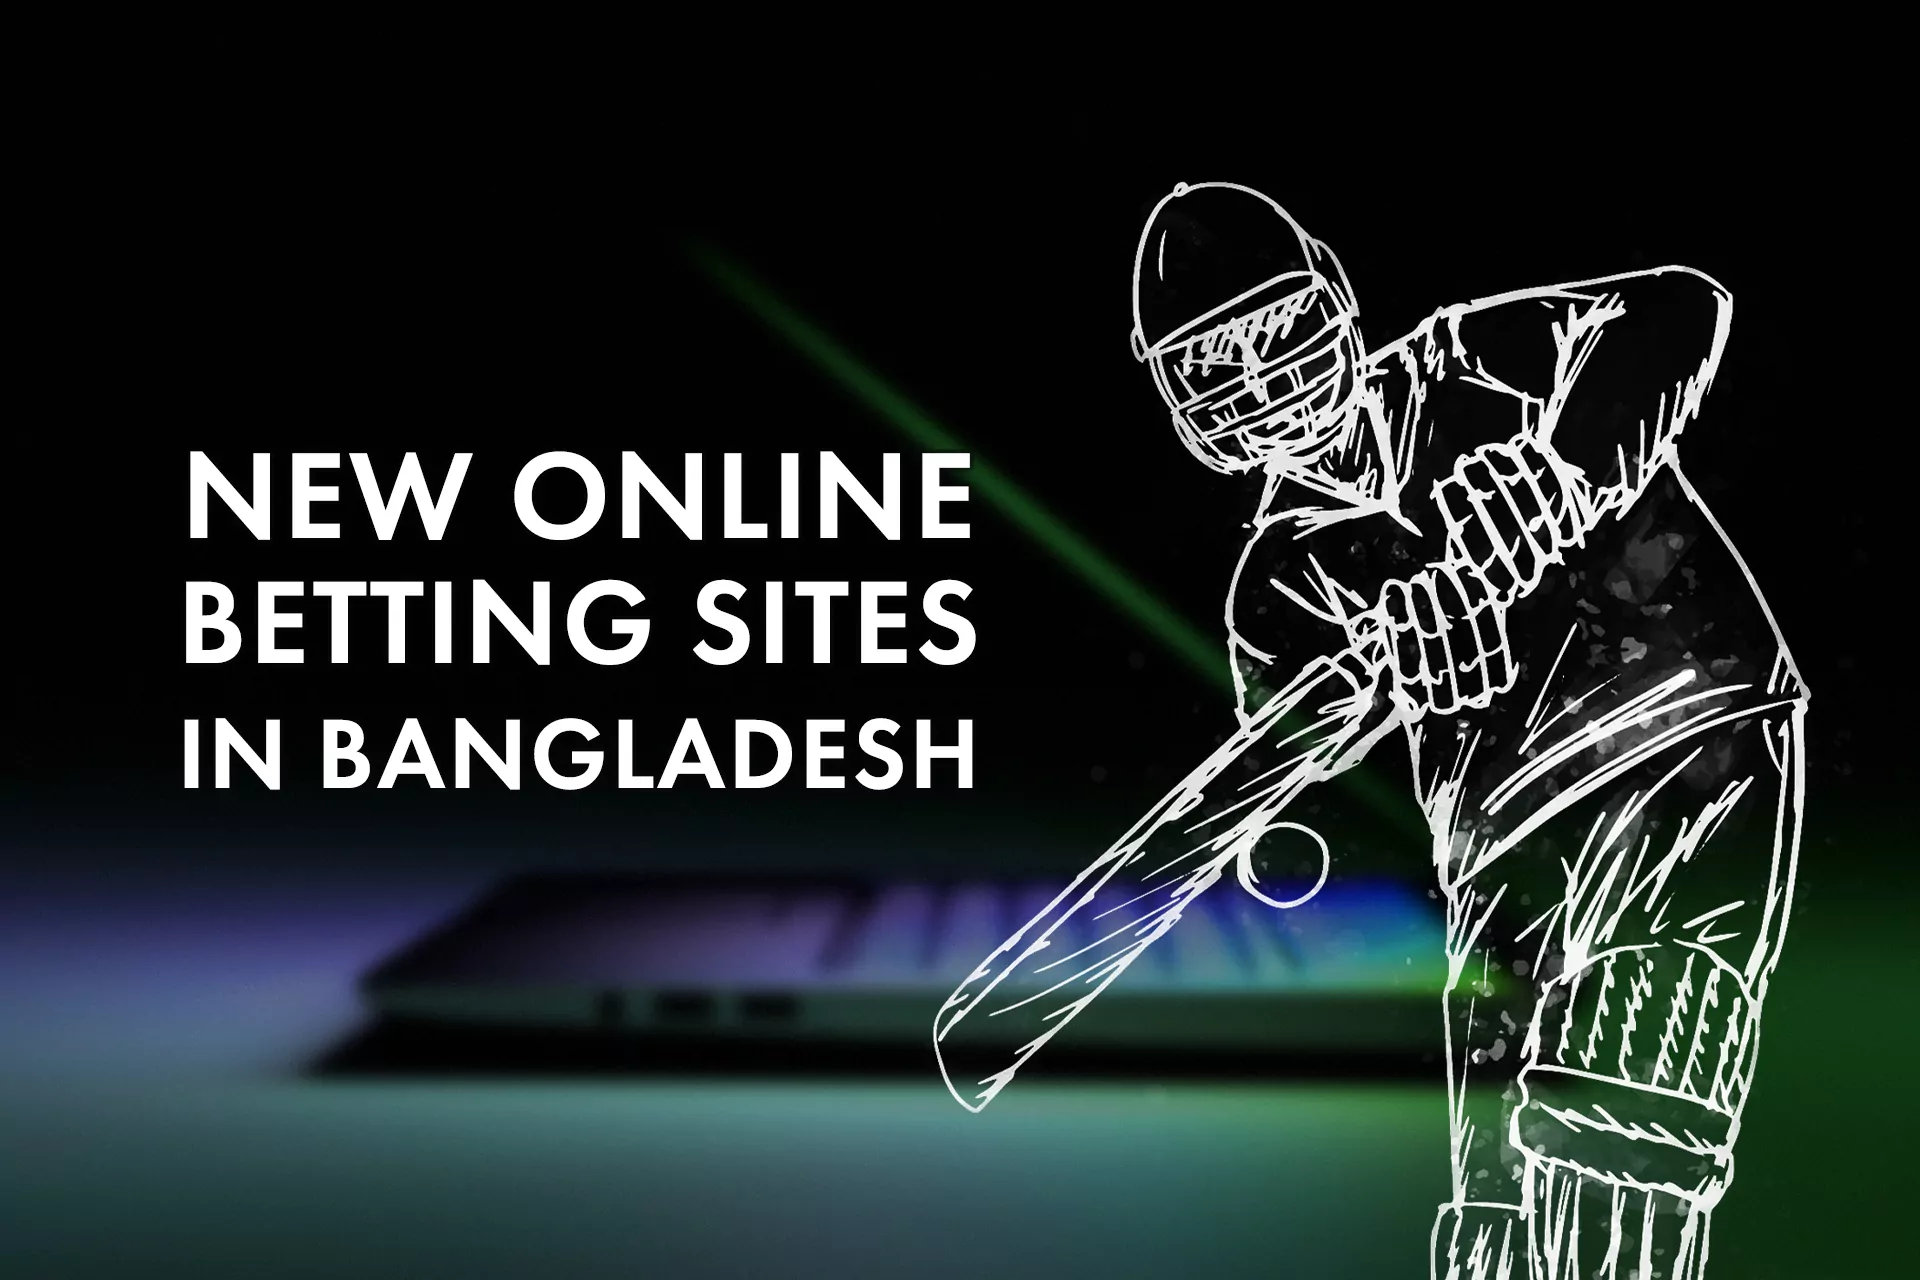 Reviews of new online betting sites in Bangladesh with great bonuses.